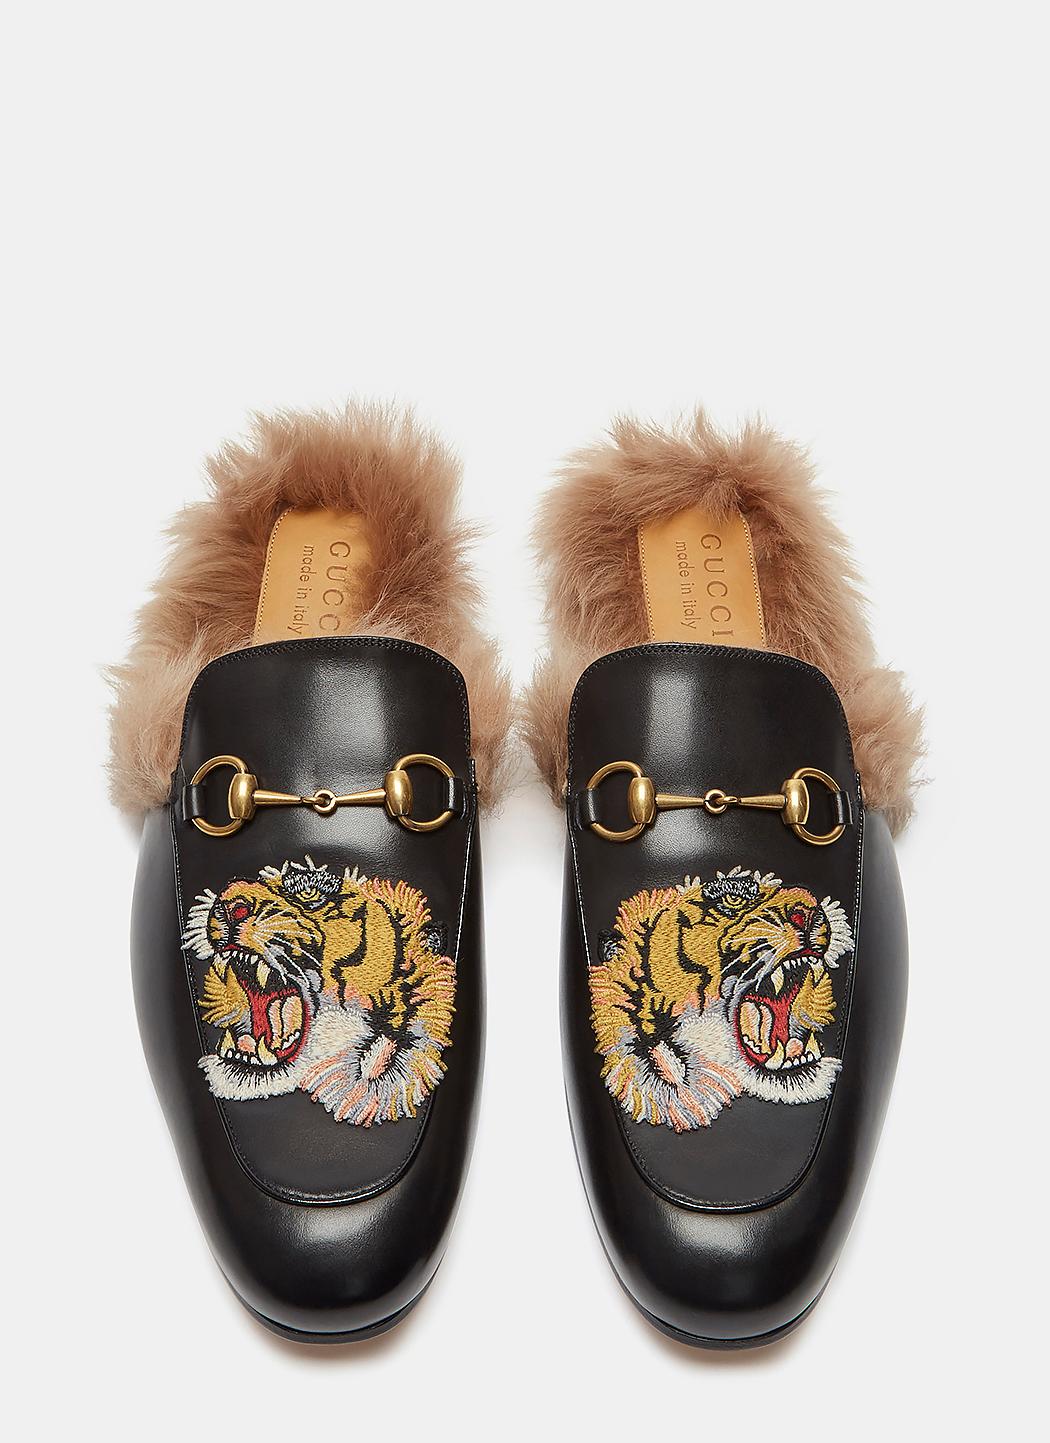 gucci loafers tiger, OFF 76%,welcome to 